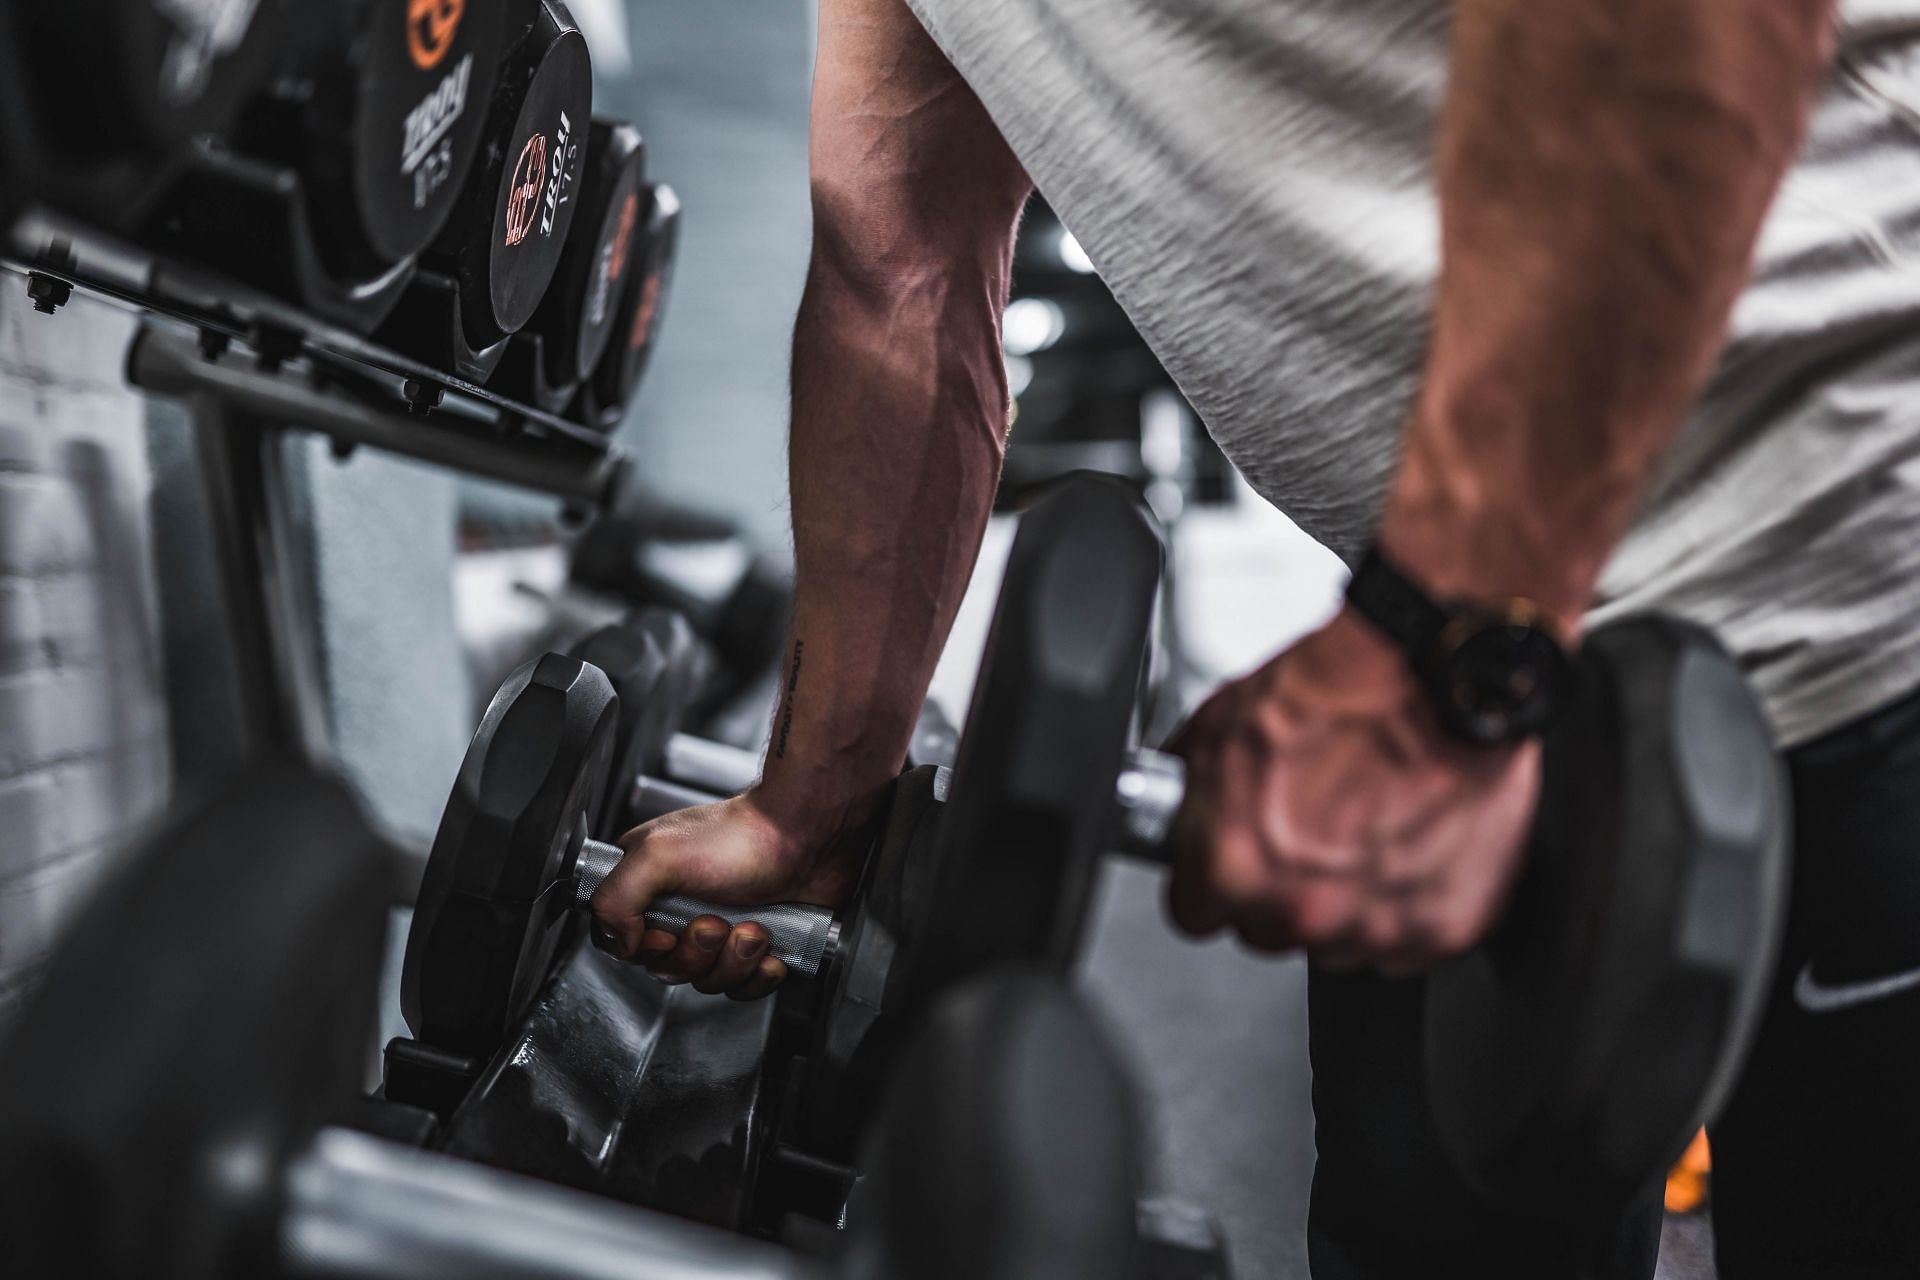 Dumbbell exercises enhance muscle activation along with stabilization of the body. (Image via Unsplash/ Anastase Maragos)